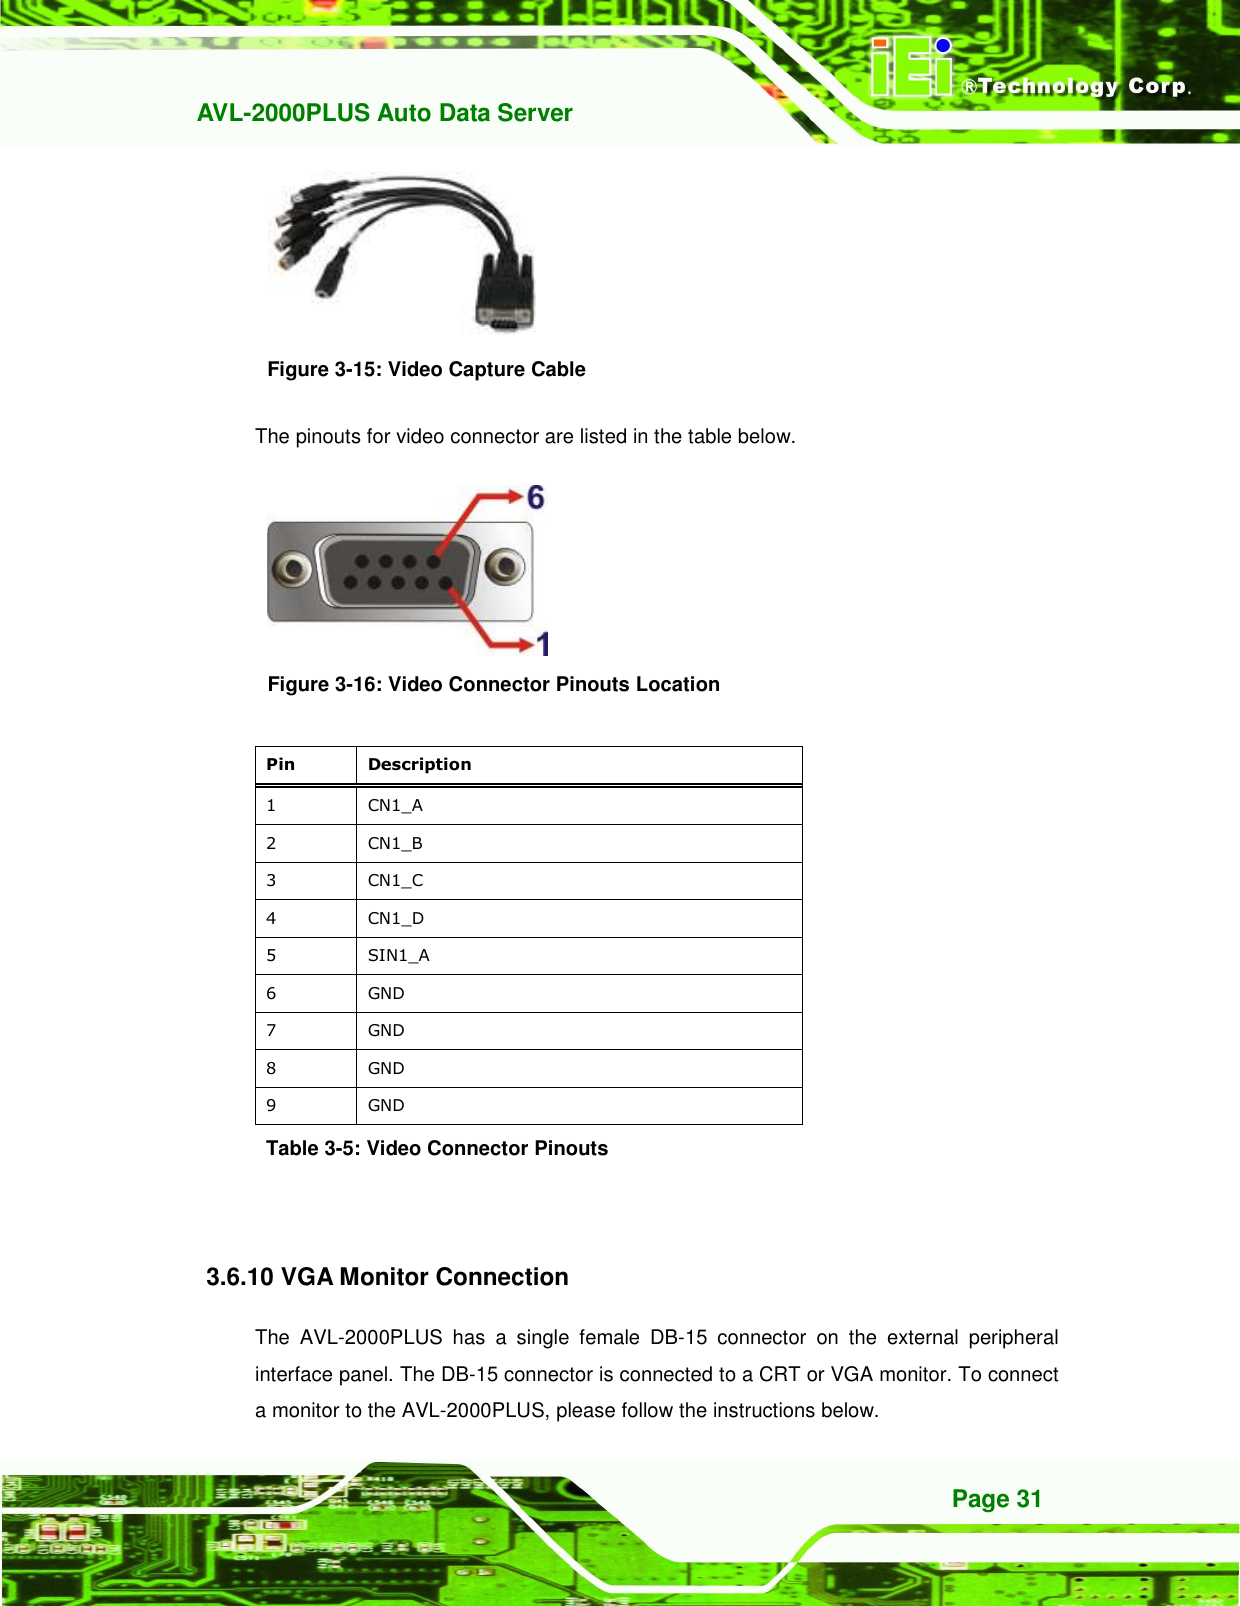   AVL-2000PLUS Auto Data Server Page 31        Figure 3-15: Video Capture Cable The pinouts for video connector are listed in the table below.  Figure 3-16: Video Connector Pinouts Location  Pin  Description   1  CN1_A 2  CN1_B 3  CN1_C 4  CN1_D 5  SIN1_A 6  GND 7  GND 8  GND 9  GND Table 3-5: Video Connector Pinouts      3.6.10 VGA Monitor Connection The  AVL-2000PLUS  has  a  single  female  DB-15  connector  on  the  external  peripheral interface panel. The DB-15 connector is connected to a CRT or VGA monitor. To connect a monitor to the AVL-2000PLUS, please follow the instructions below. 